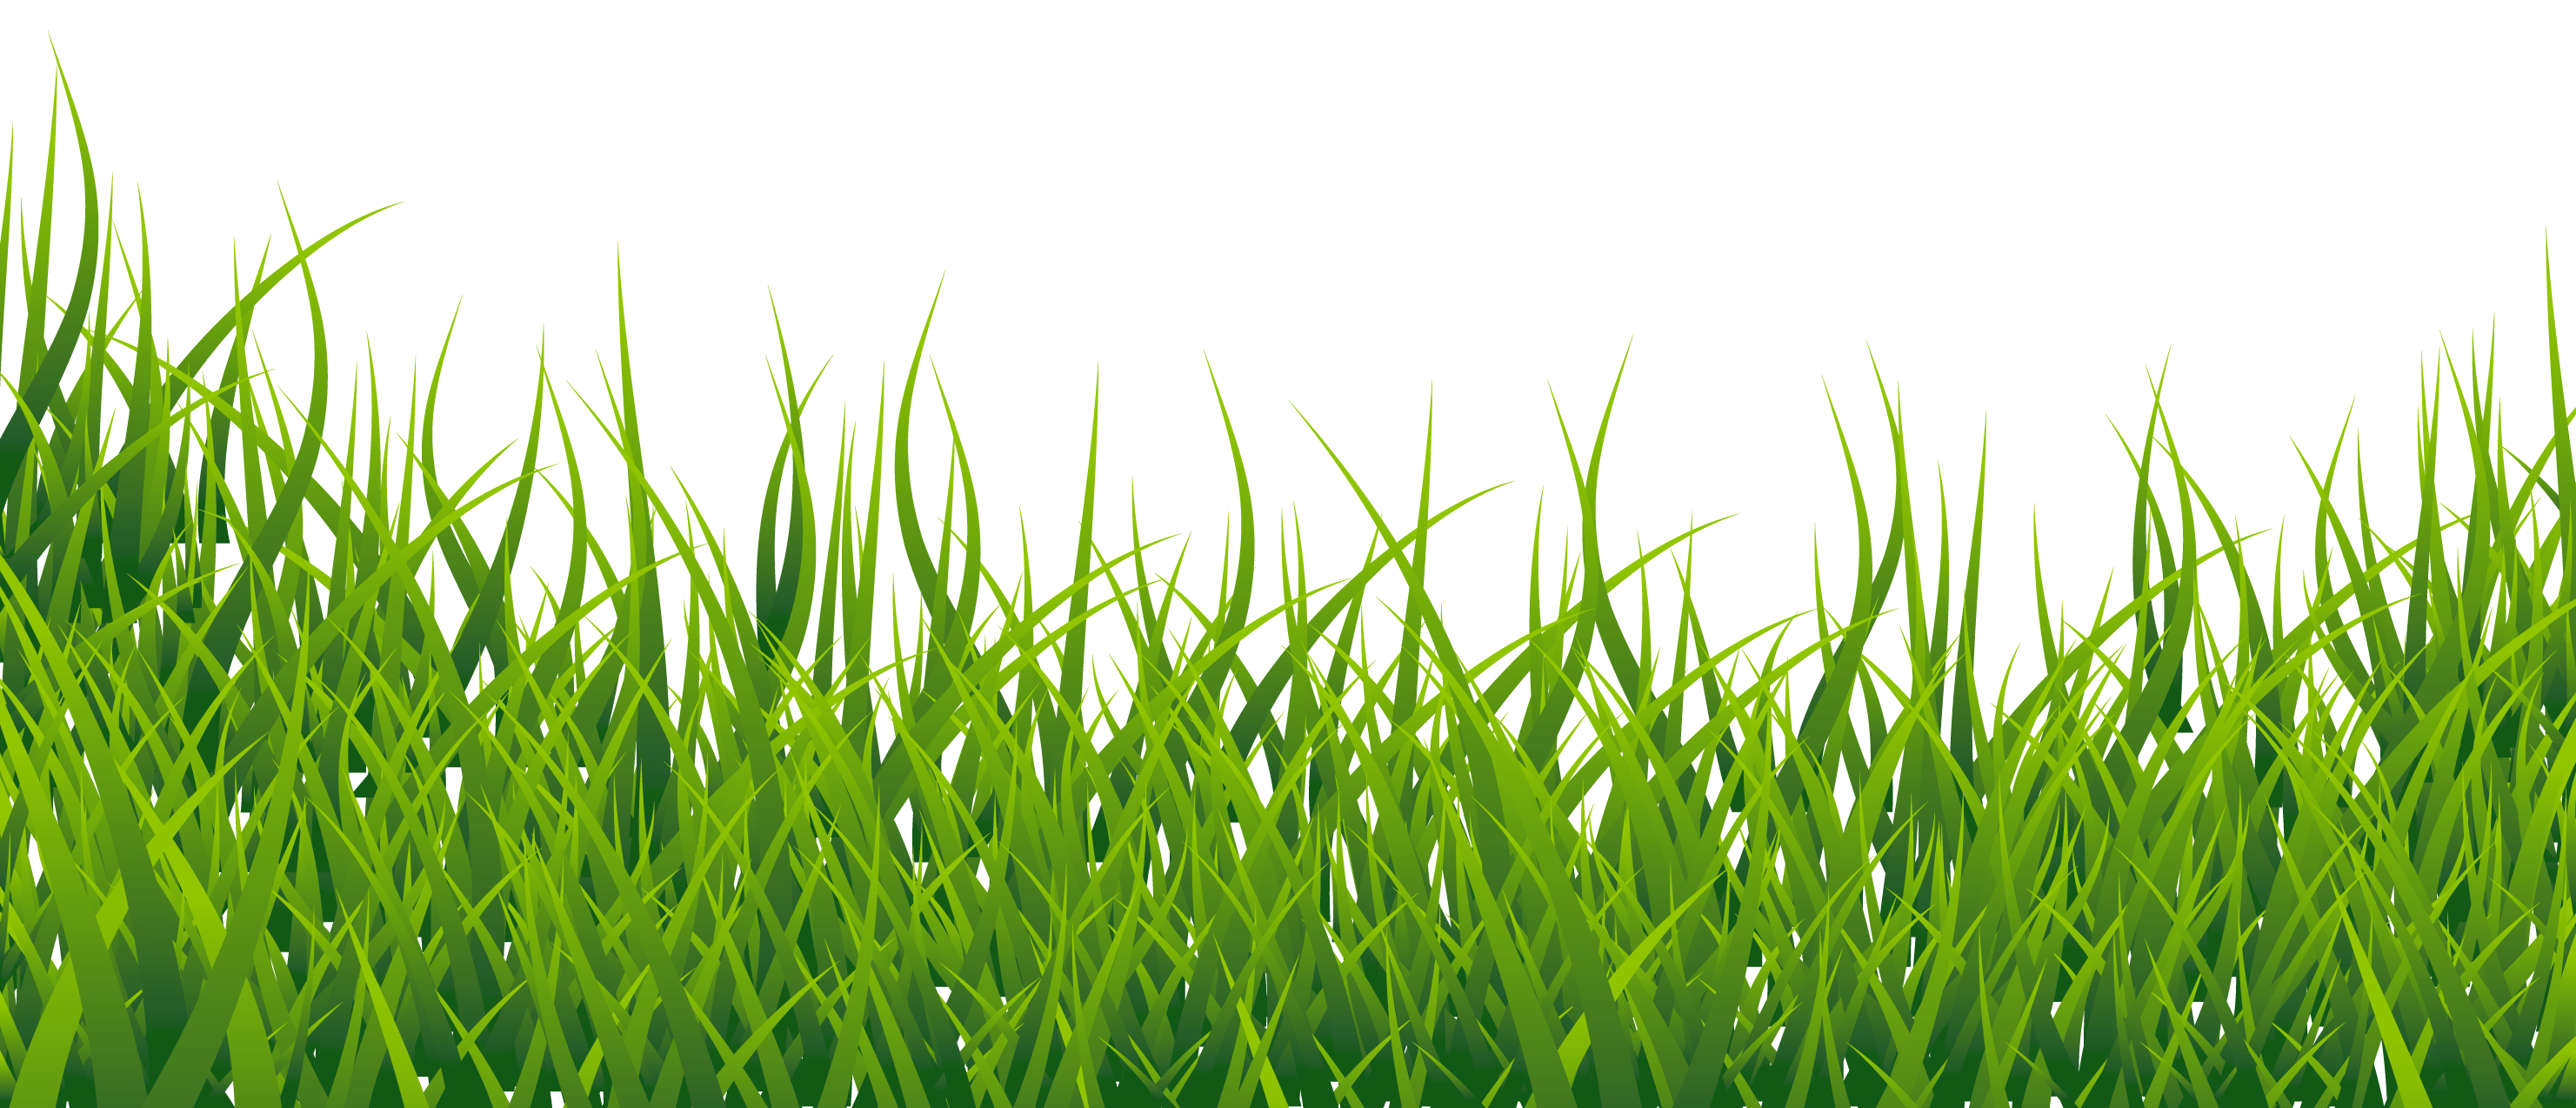 Download PNG image - Grass Vector PNG Pic 